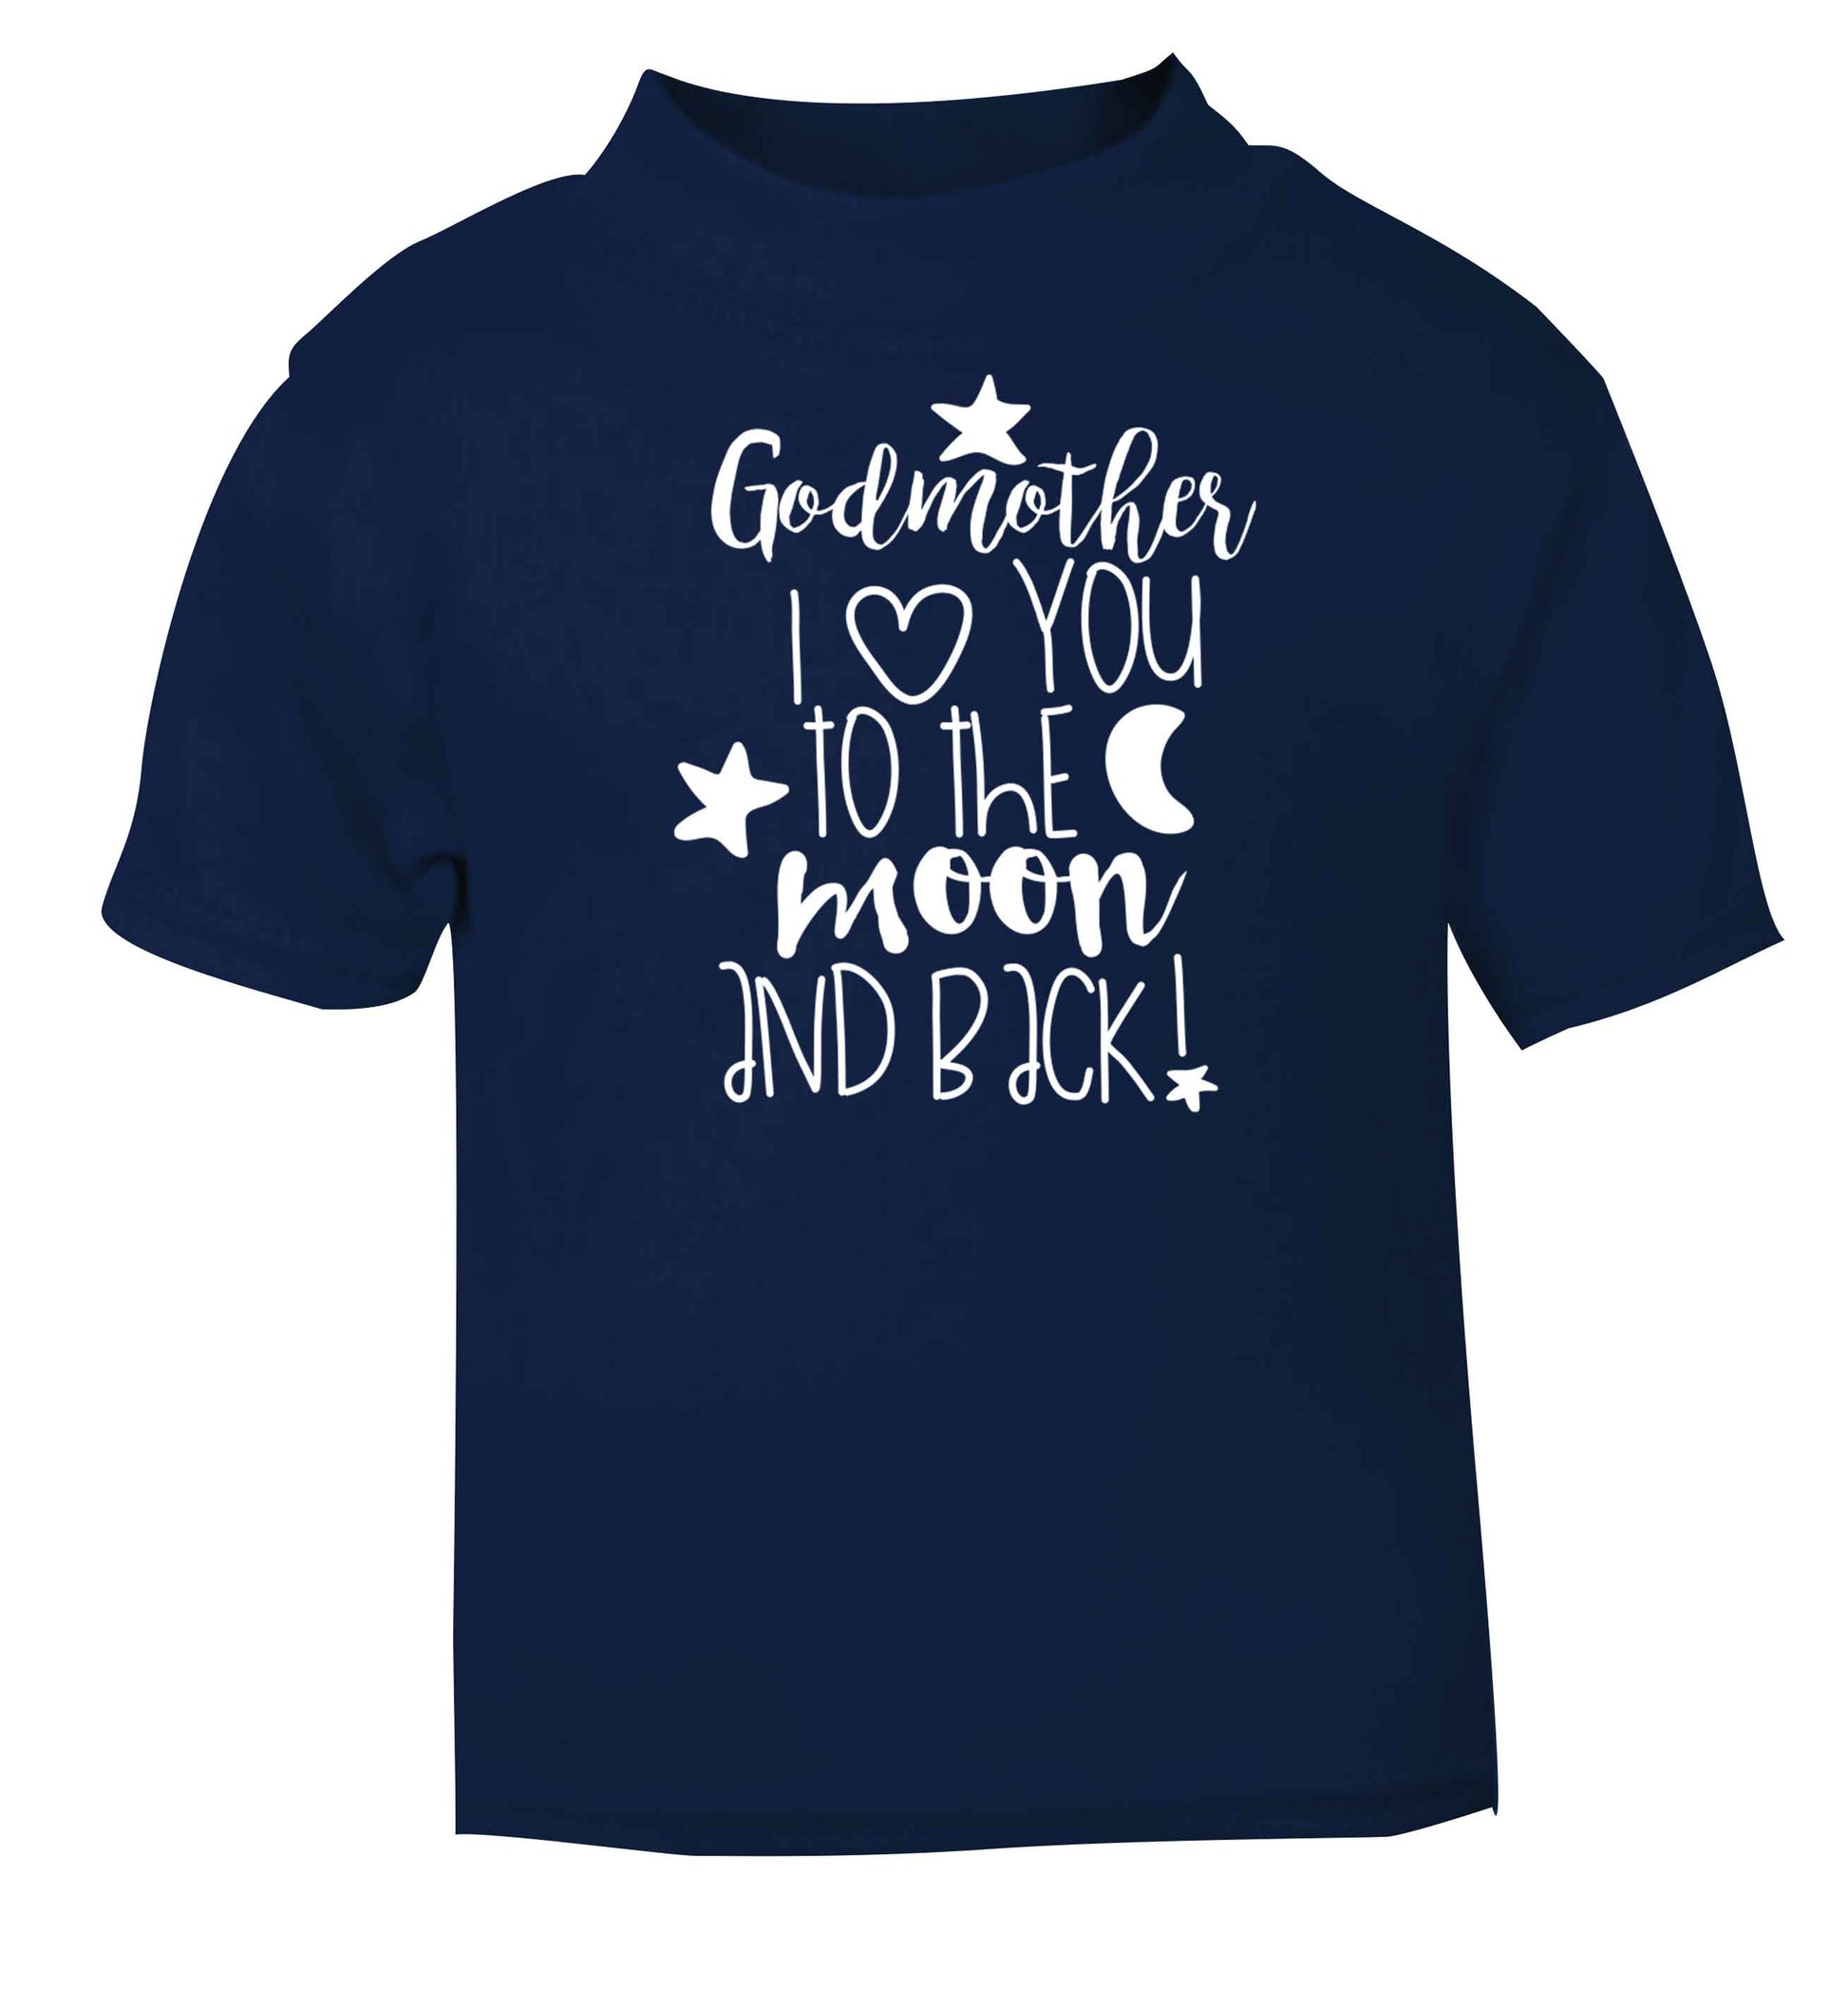 Godmother I love you to the moon and back navy baby toddler Tshirt 2 Years